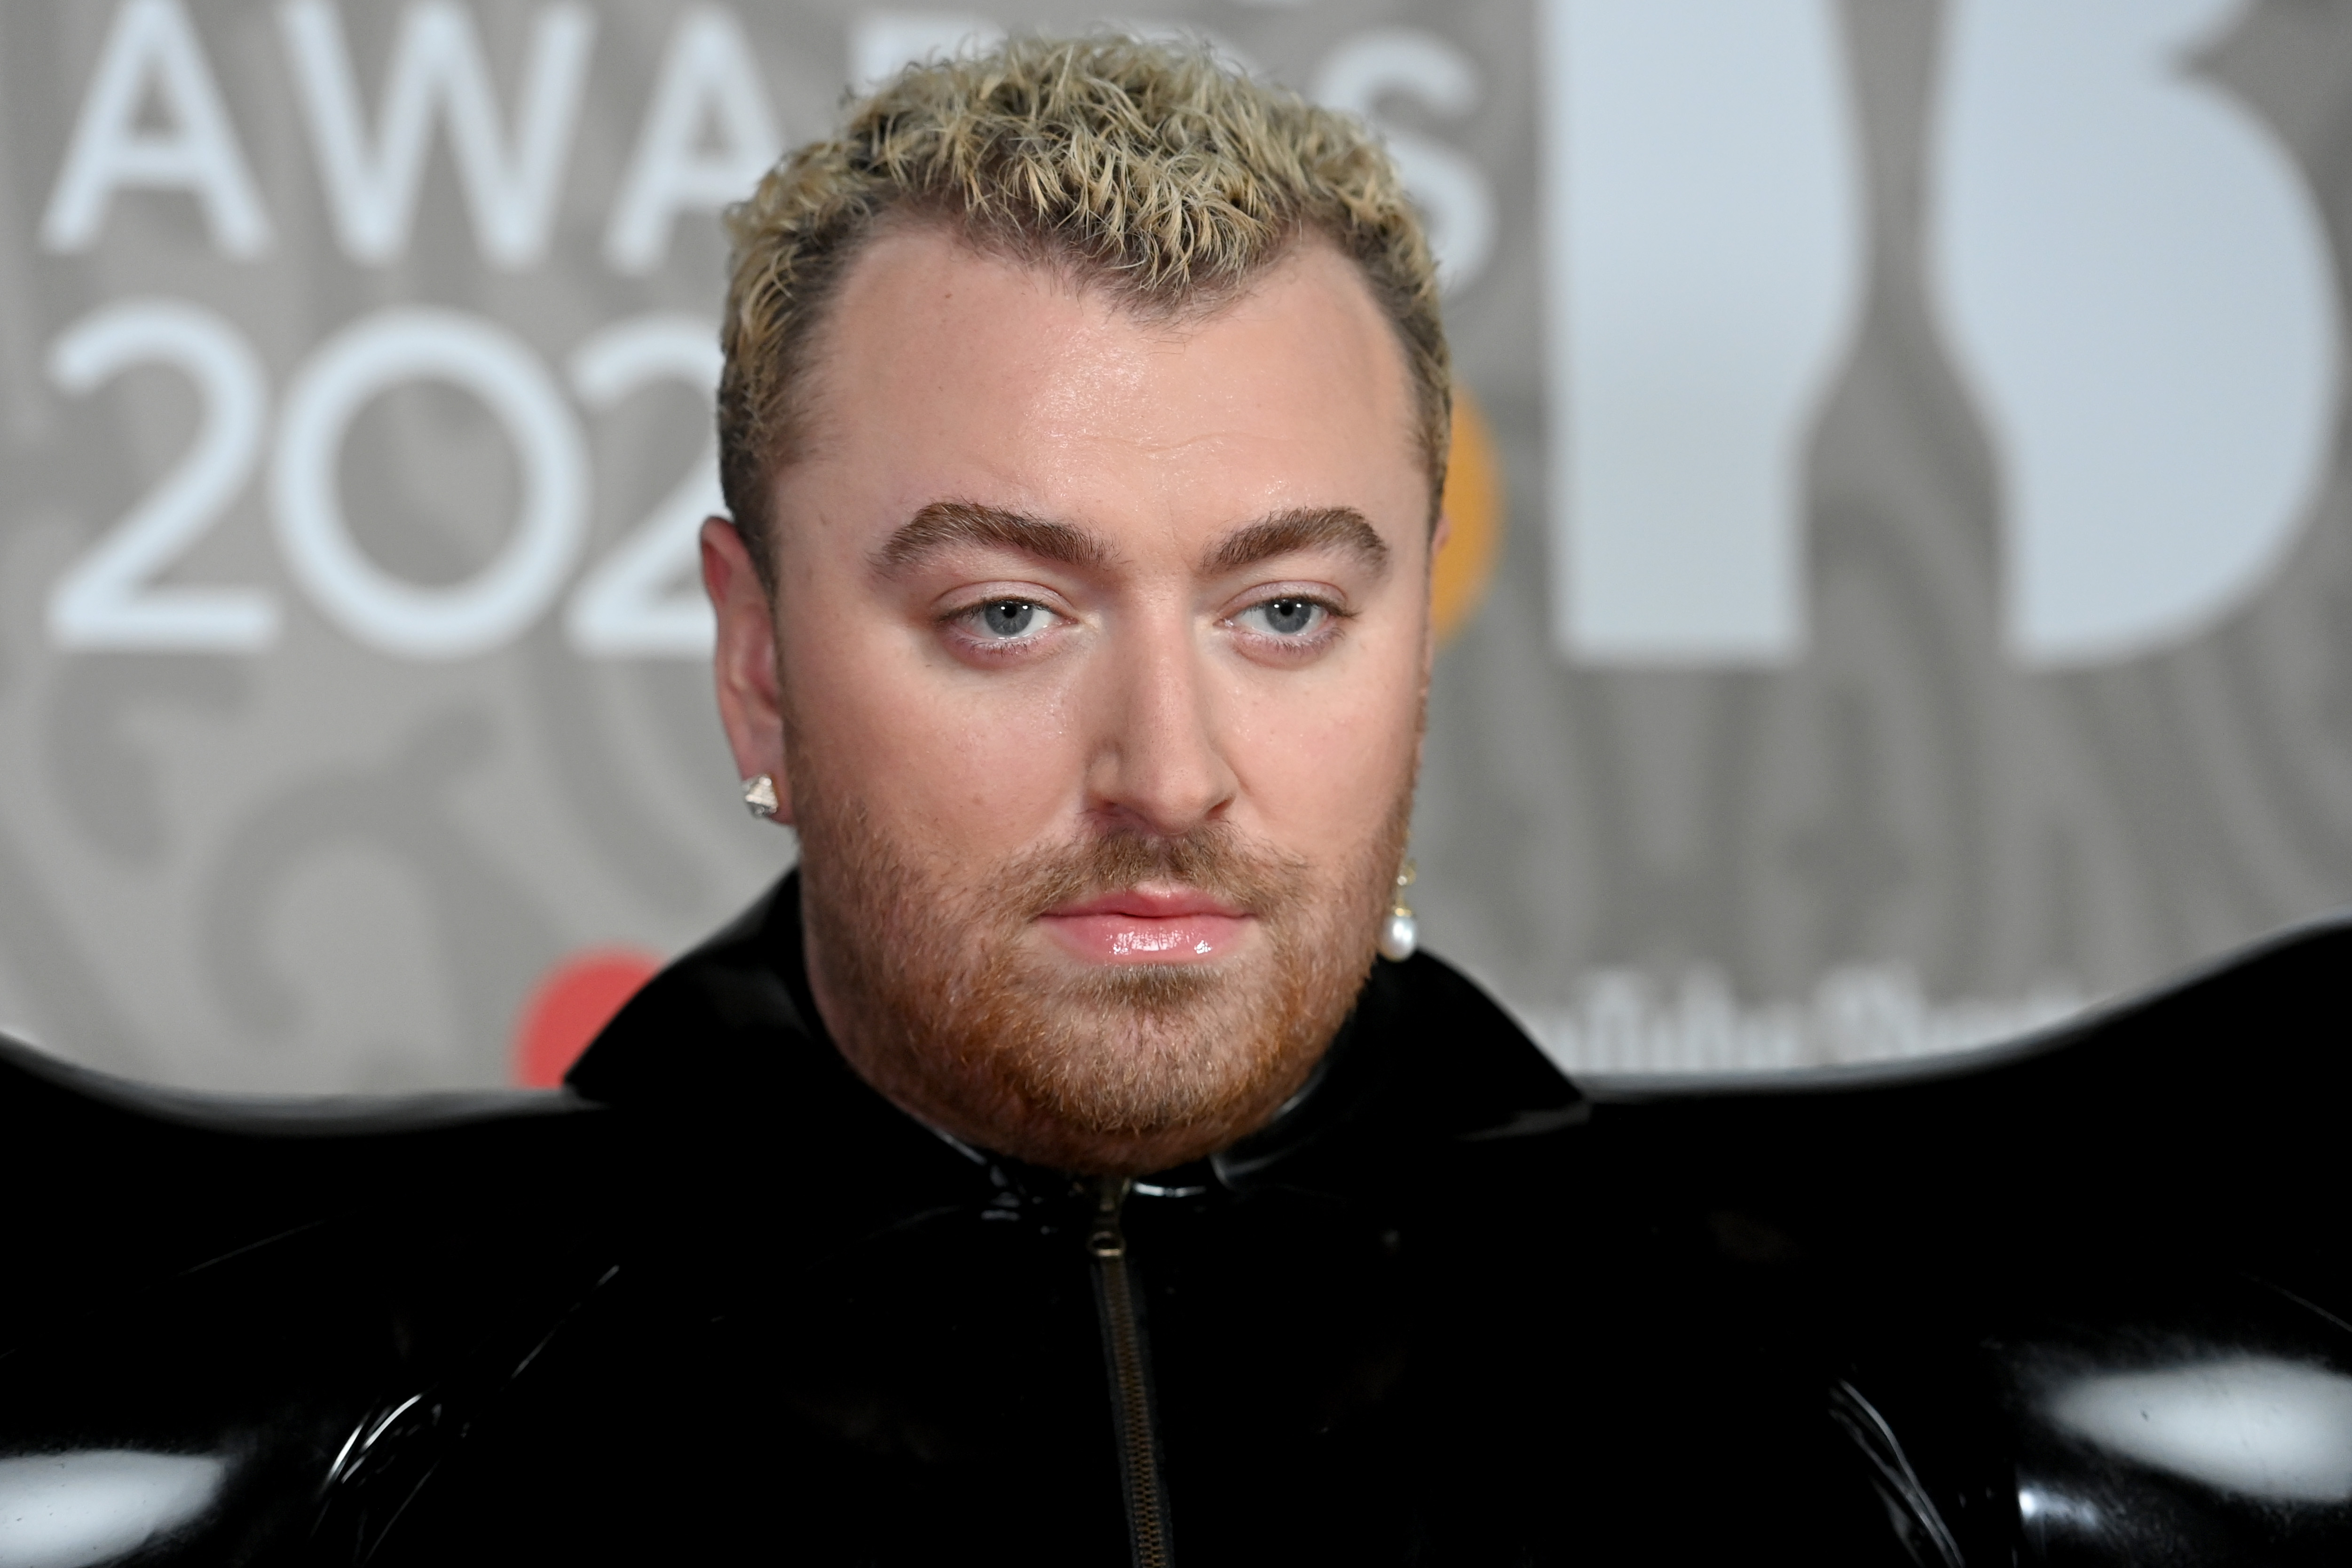 What went behind Sam Smith's inflated latex pants seen at The Brit Awards